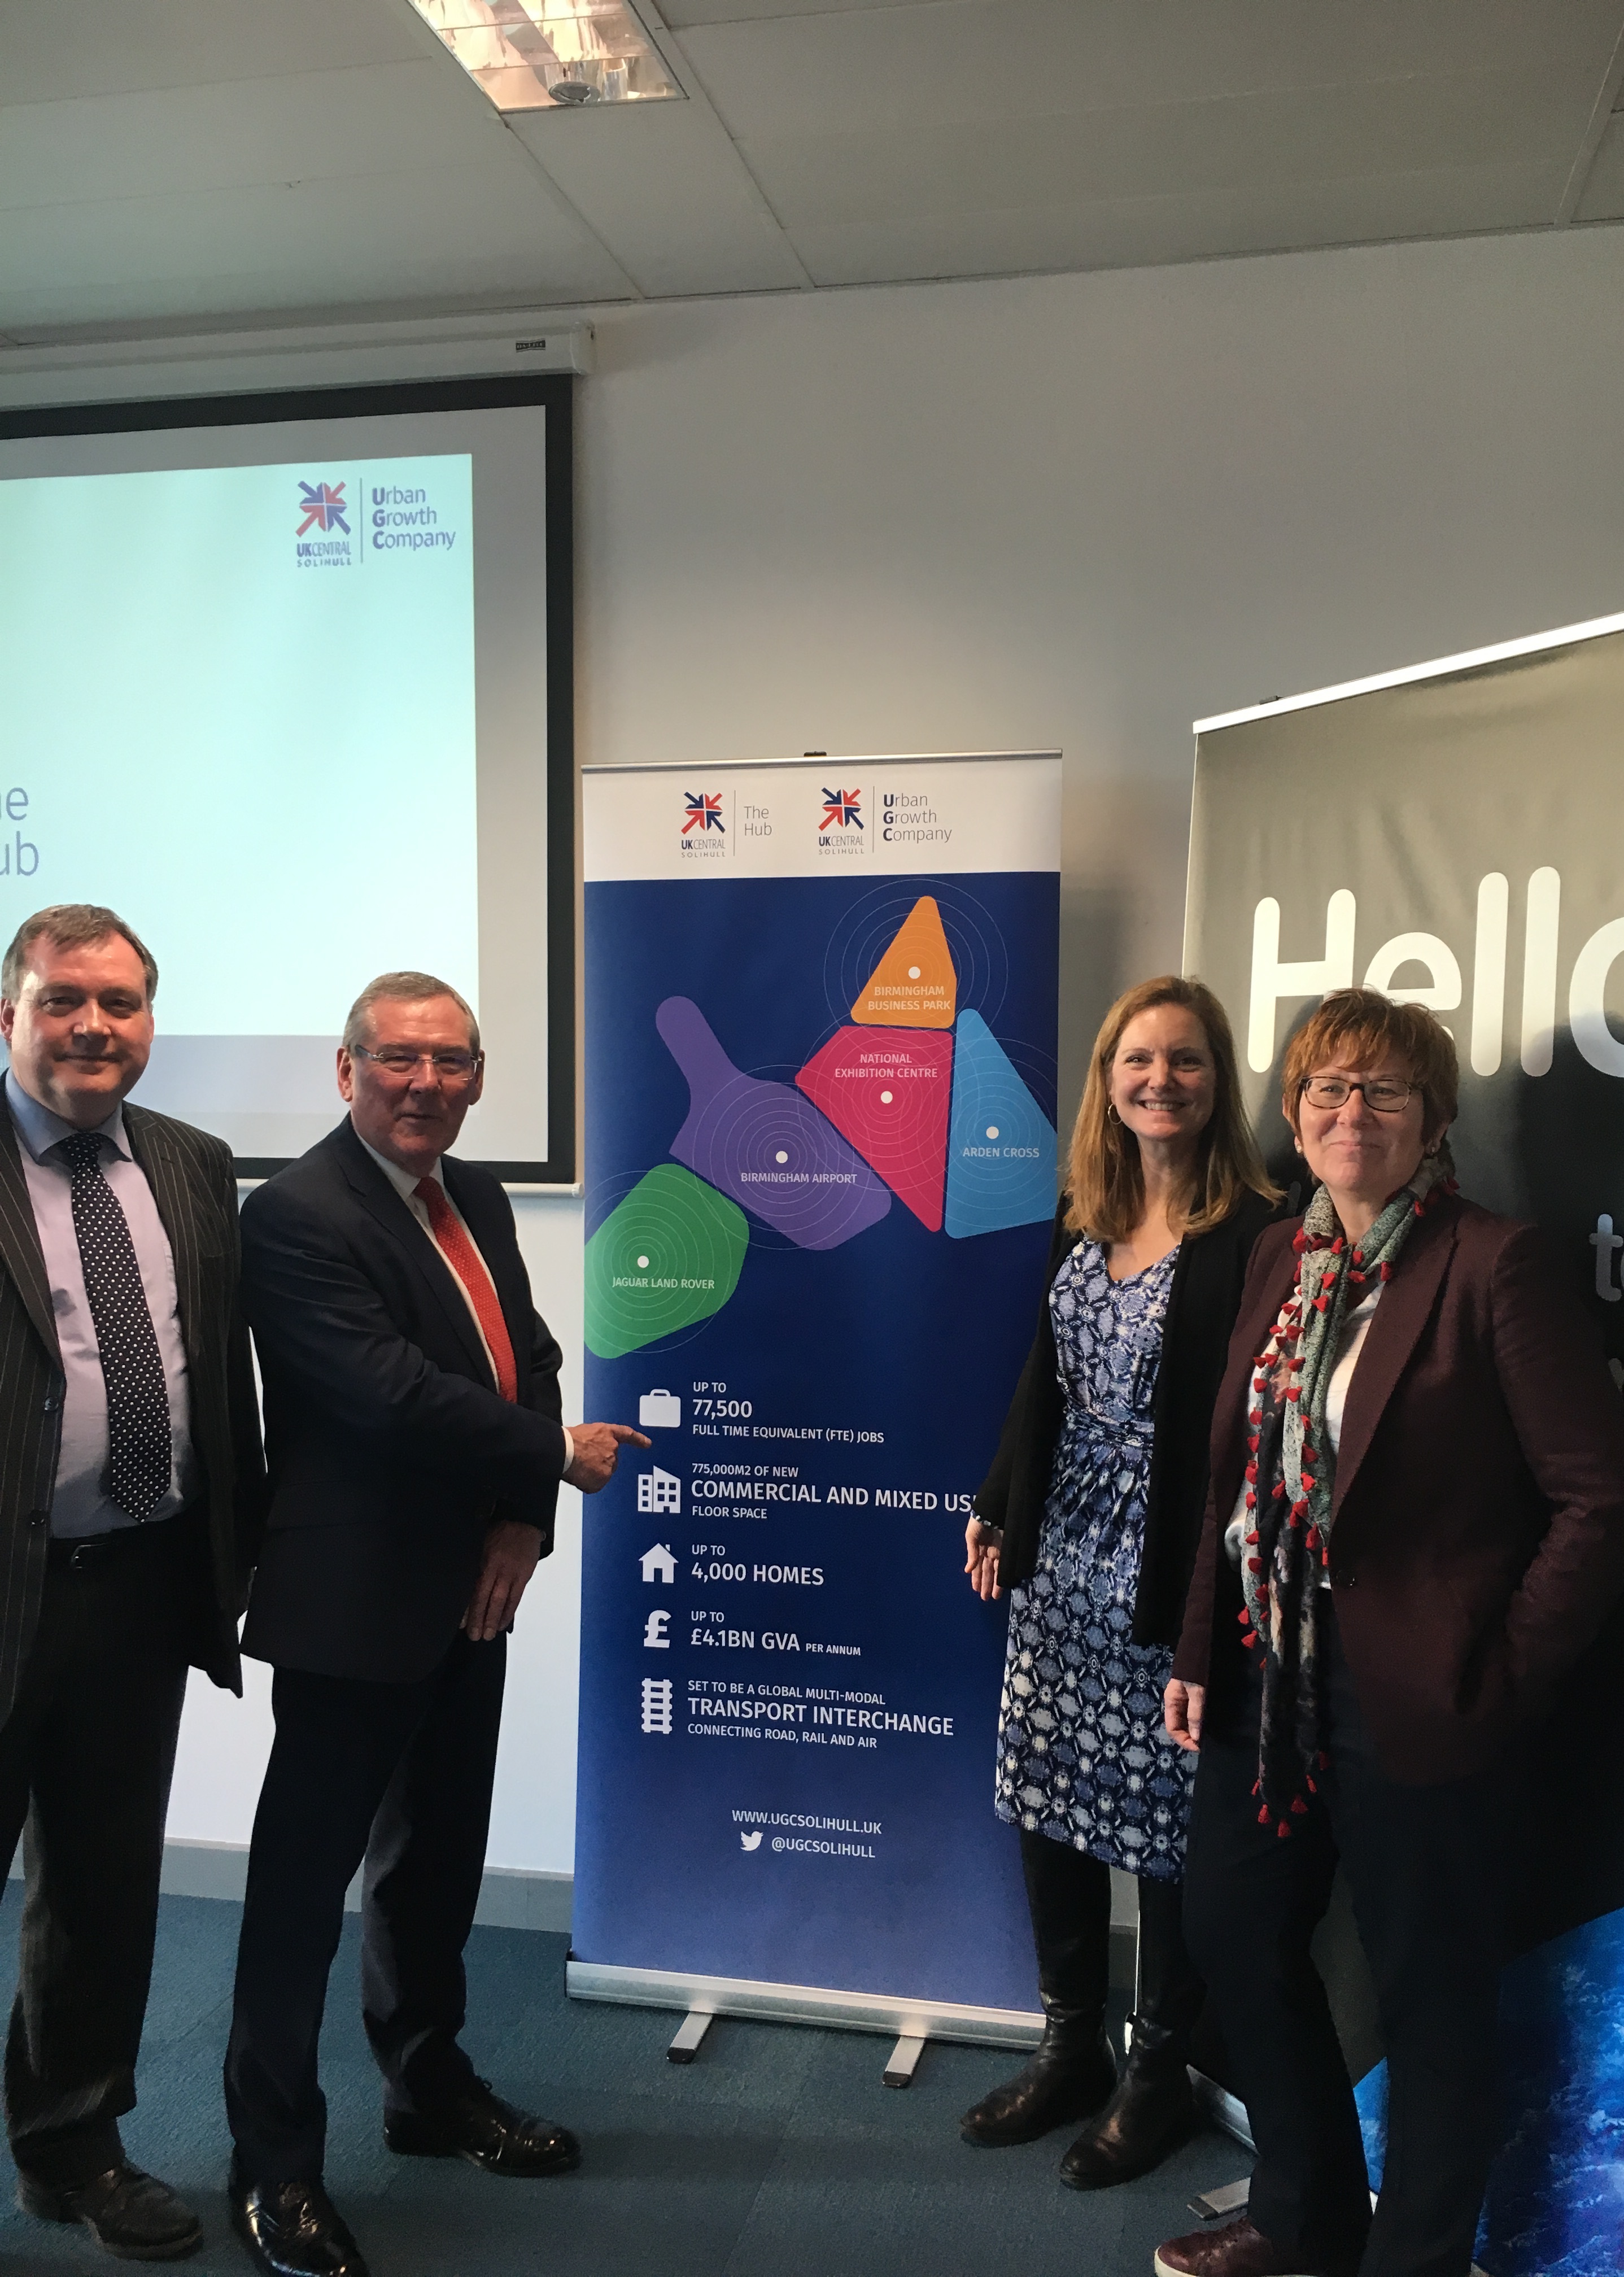 (l-r) Huw Rhys Lewis, managing director of the Urban Growth Company, Cllr Bob Sleigh, Deputy Mayor of the West Midlands and leader of Solihull Council, Laura Shoaf, managing director of Transport for West Midlands and Bernadette Kelly, Permanent Secretary at the Department for Transport